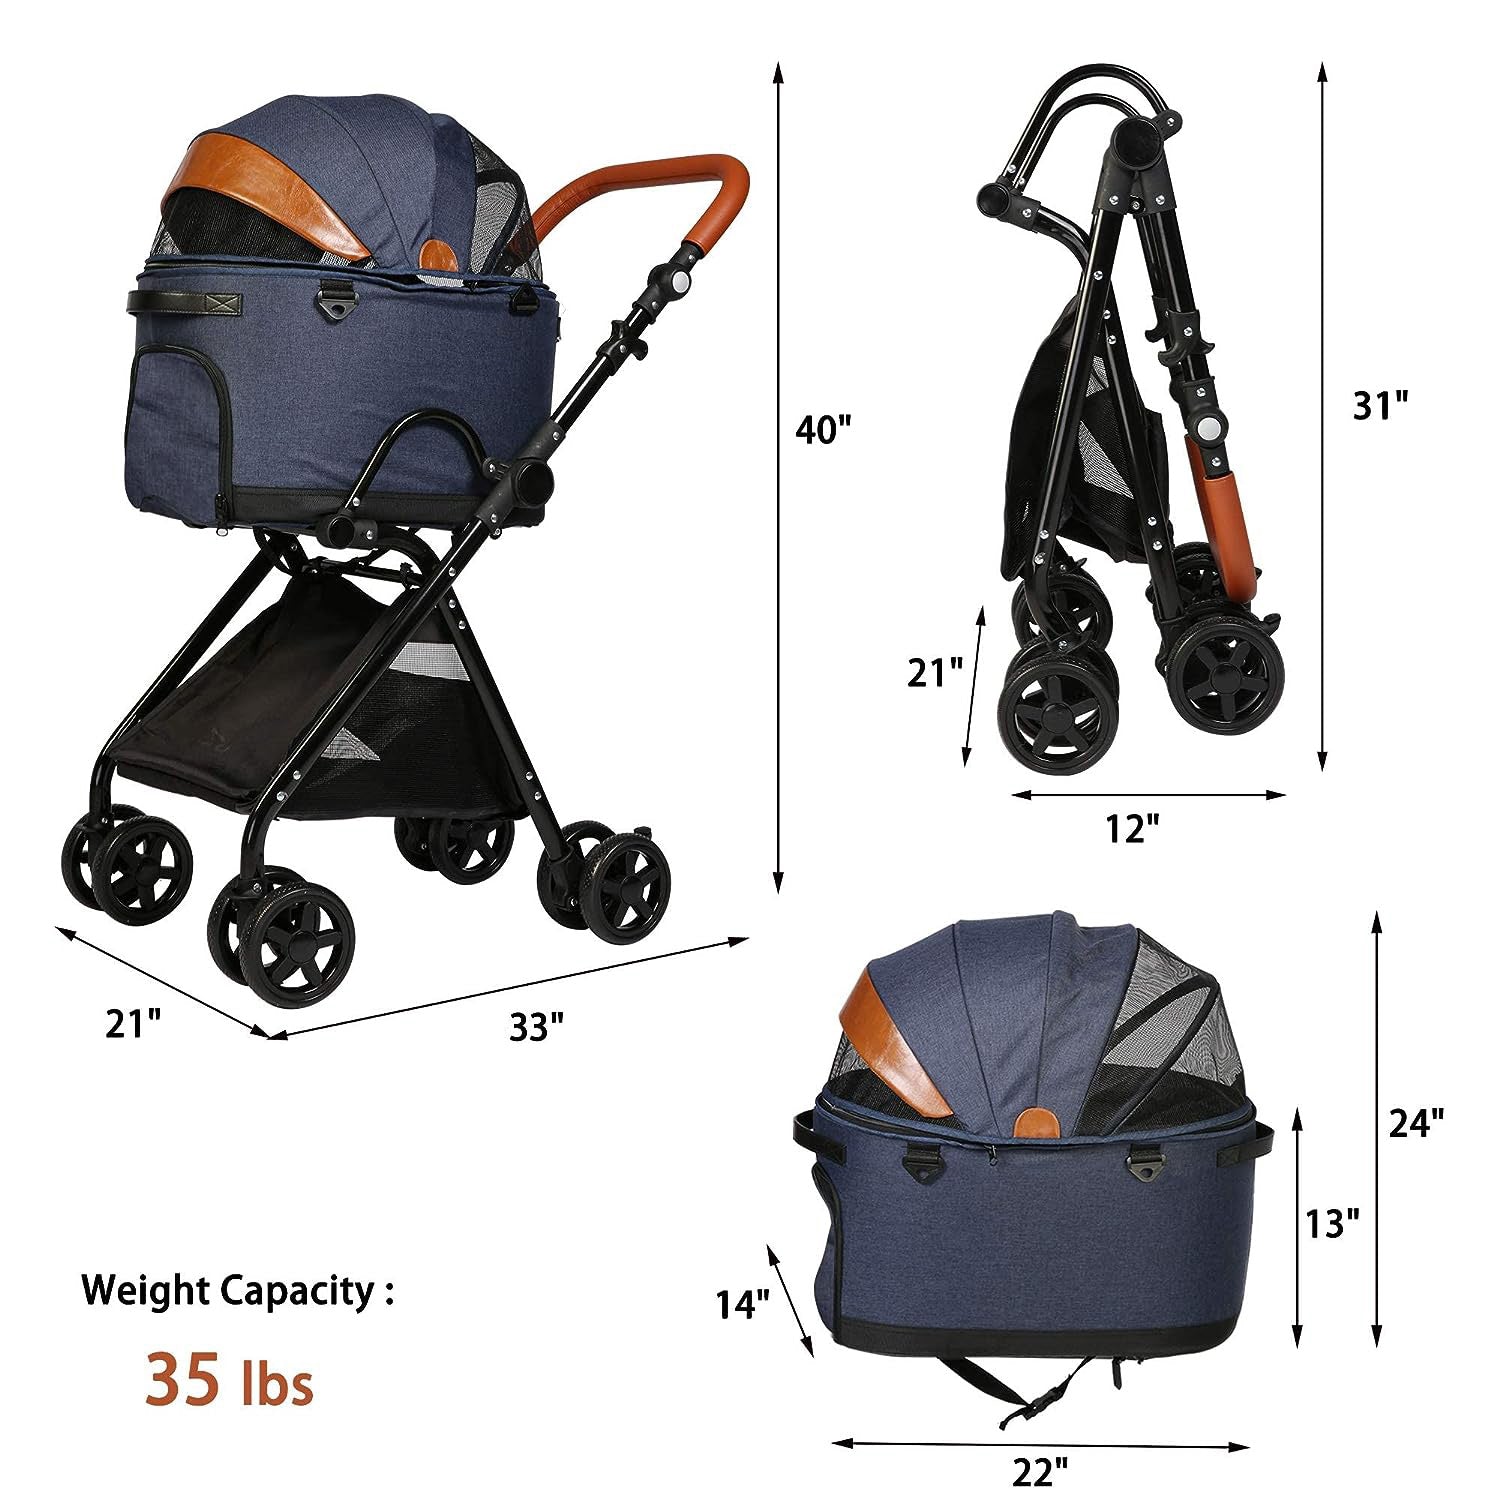 2 in 1 Dog Stroller Pet Carrier with Detachable Carrier and Adjustable Handle, Dark Blue